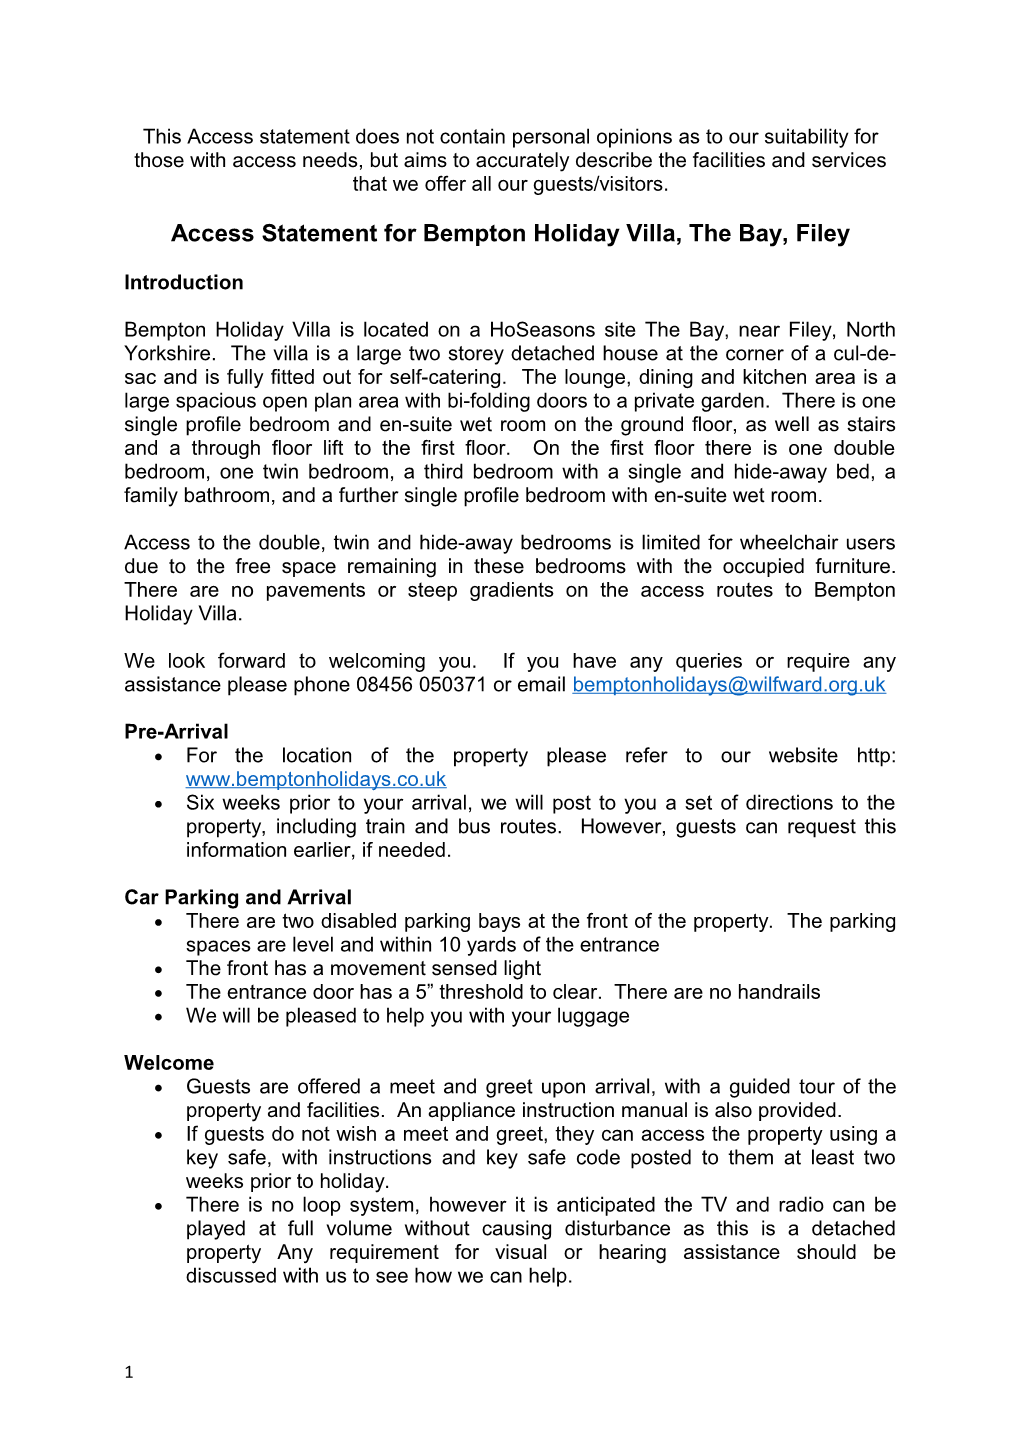 Access Statement for Bempton Holiday Villa,The Bay,Filey